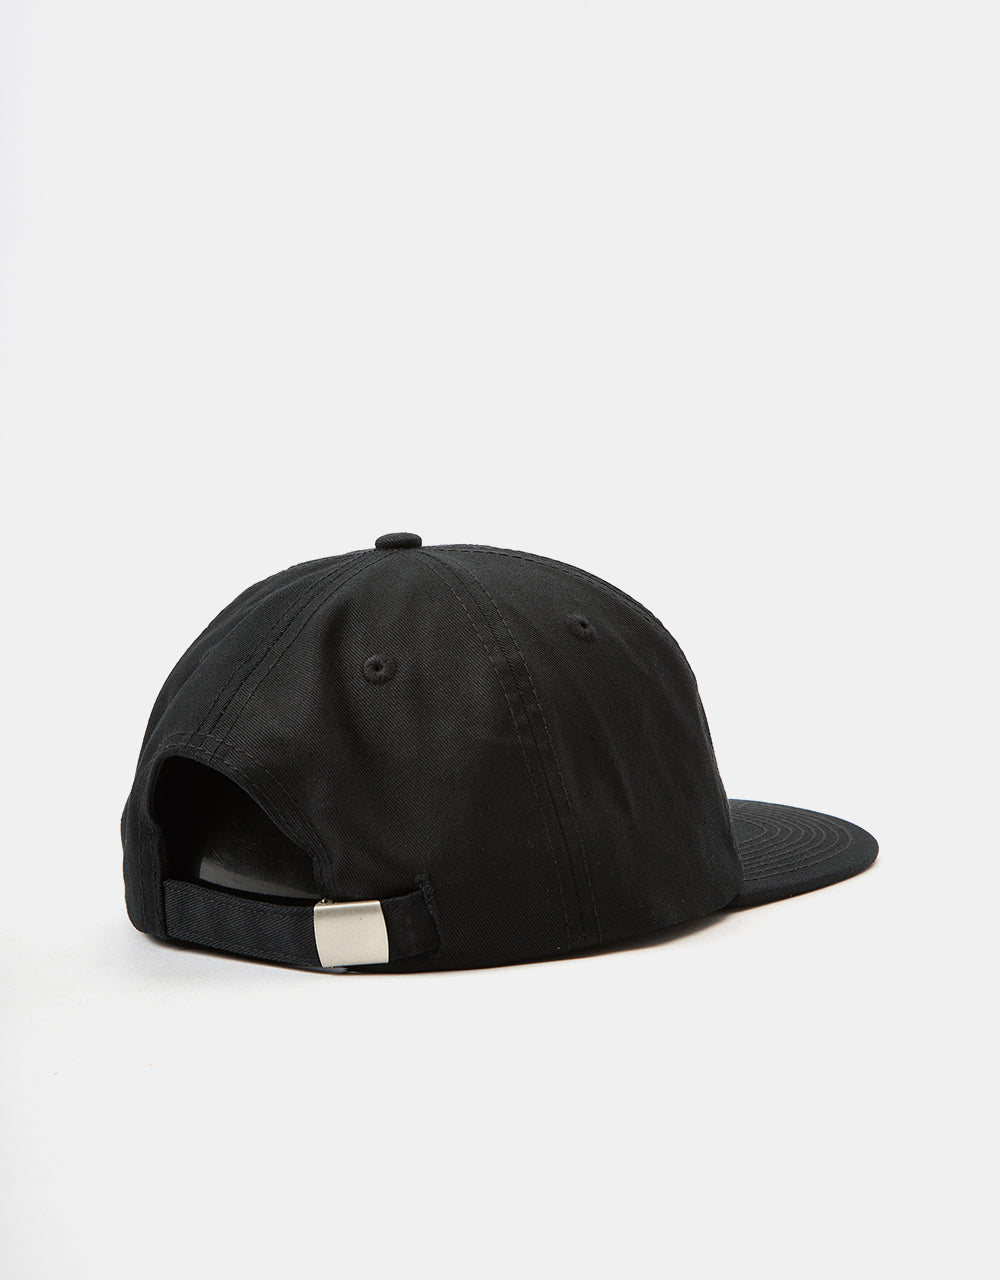 Route One Final Frontier Unstructured 6 Panel Cap - Black